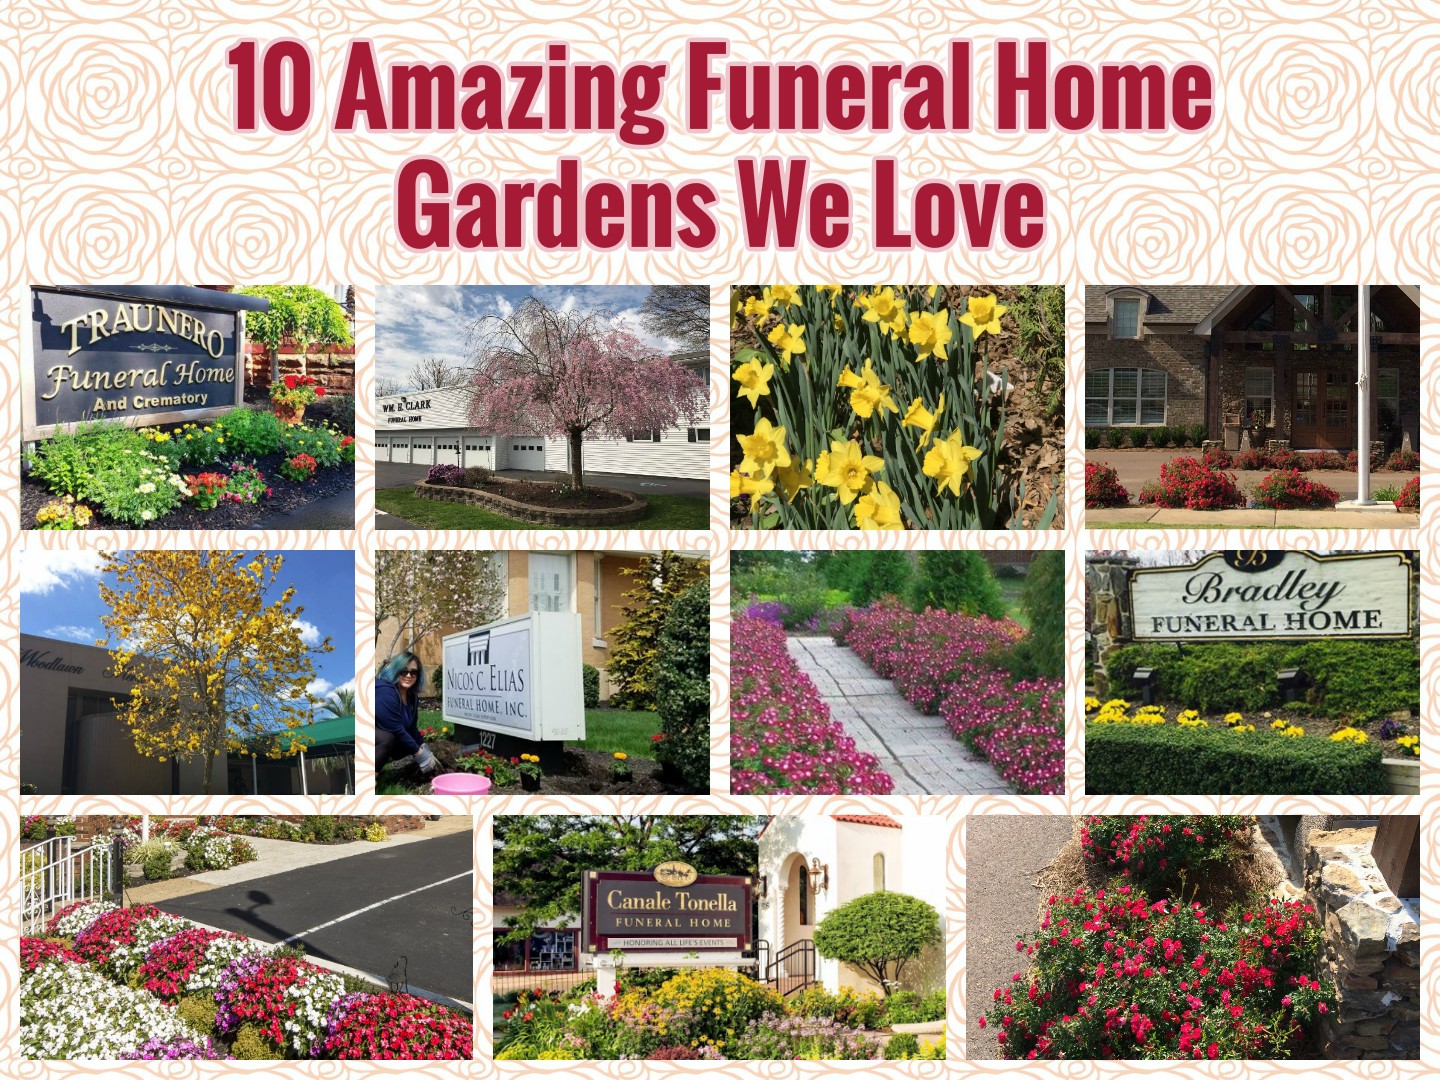 10 Amazing Funeral Home Gardens We Love